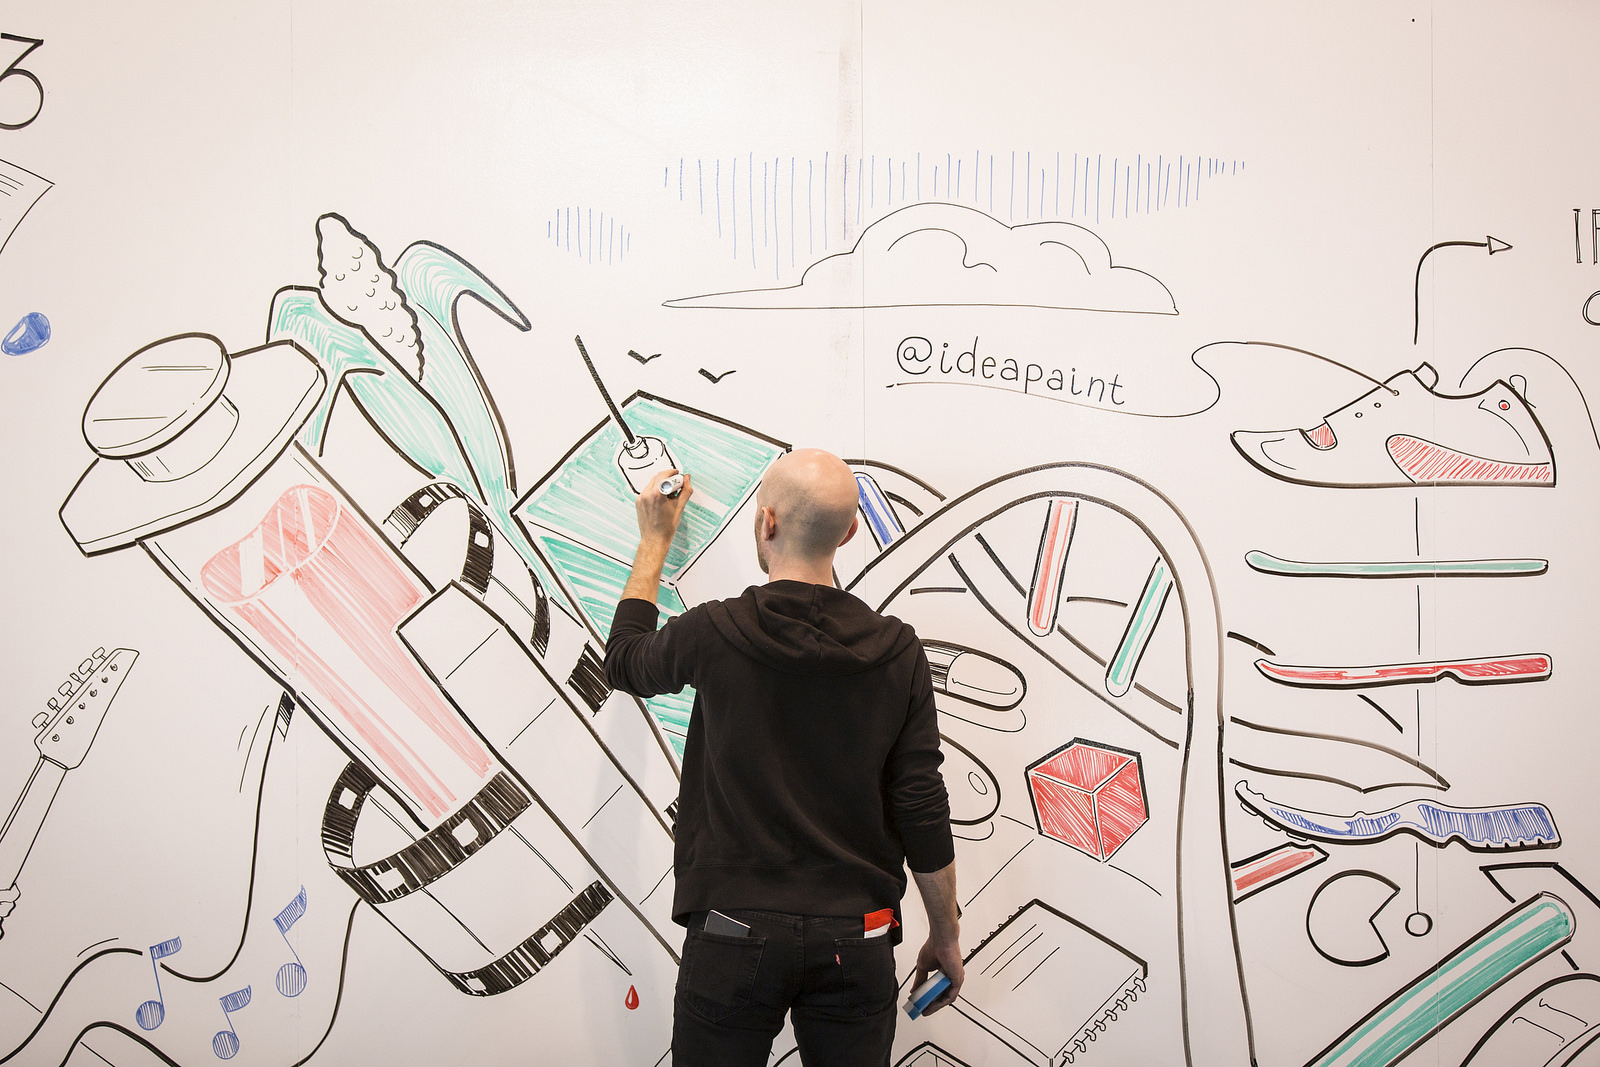 Artist Derek Cascio colors on the walls of the Vancouver Convention Center, thanks to IdeaPaint—which turns any wall into a dry erase board. Photo: Ryan Lash/TED